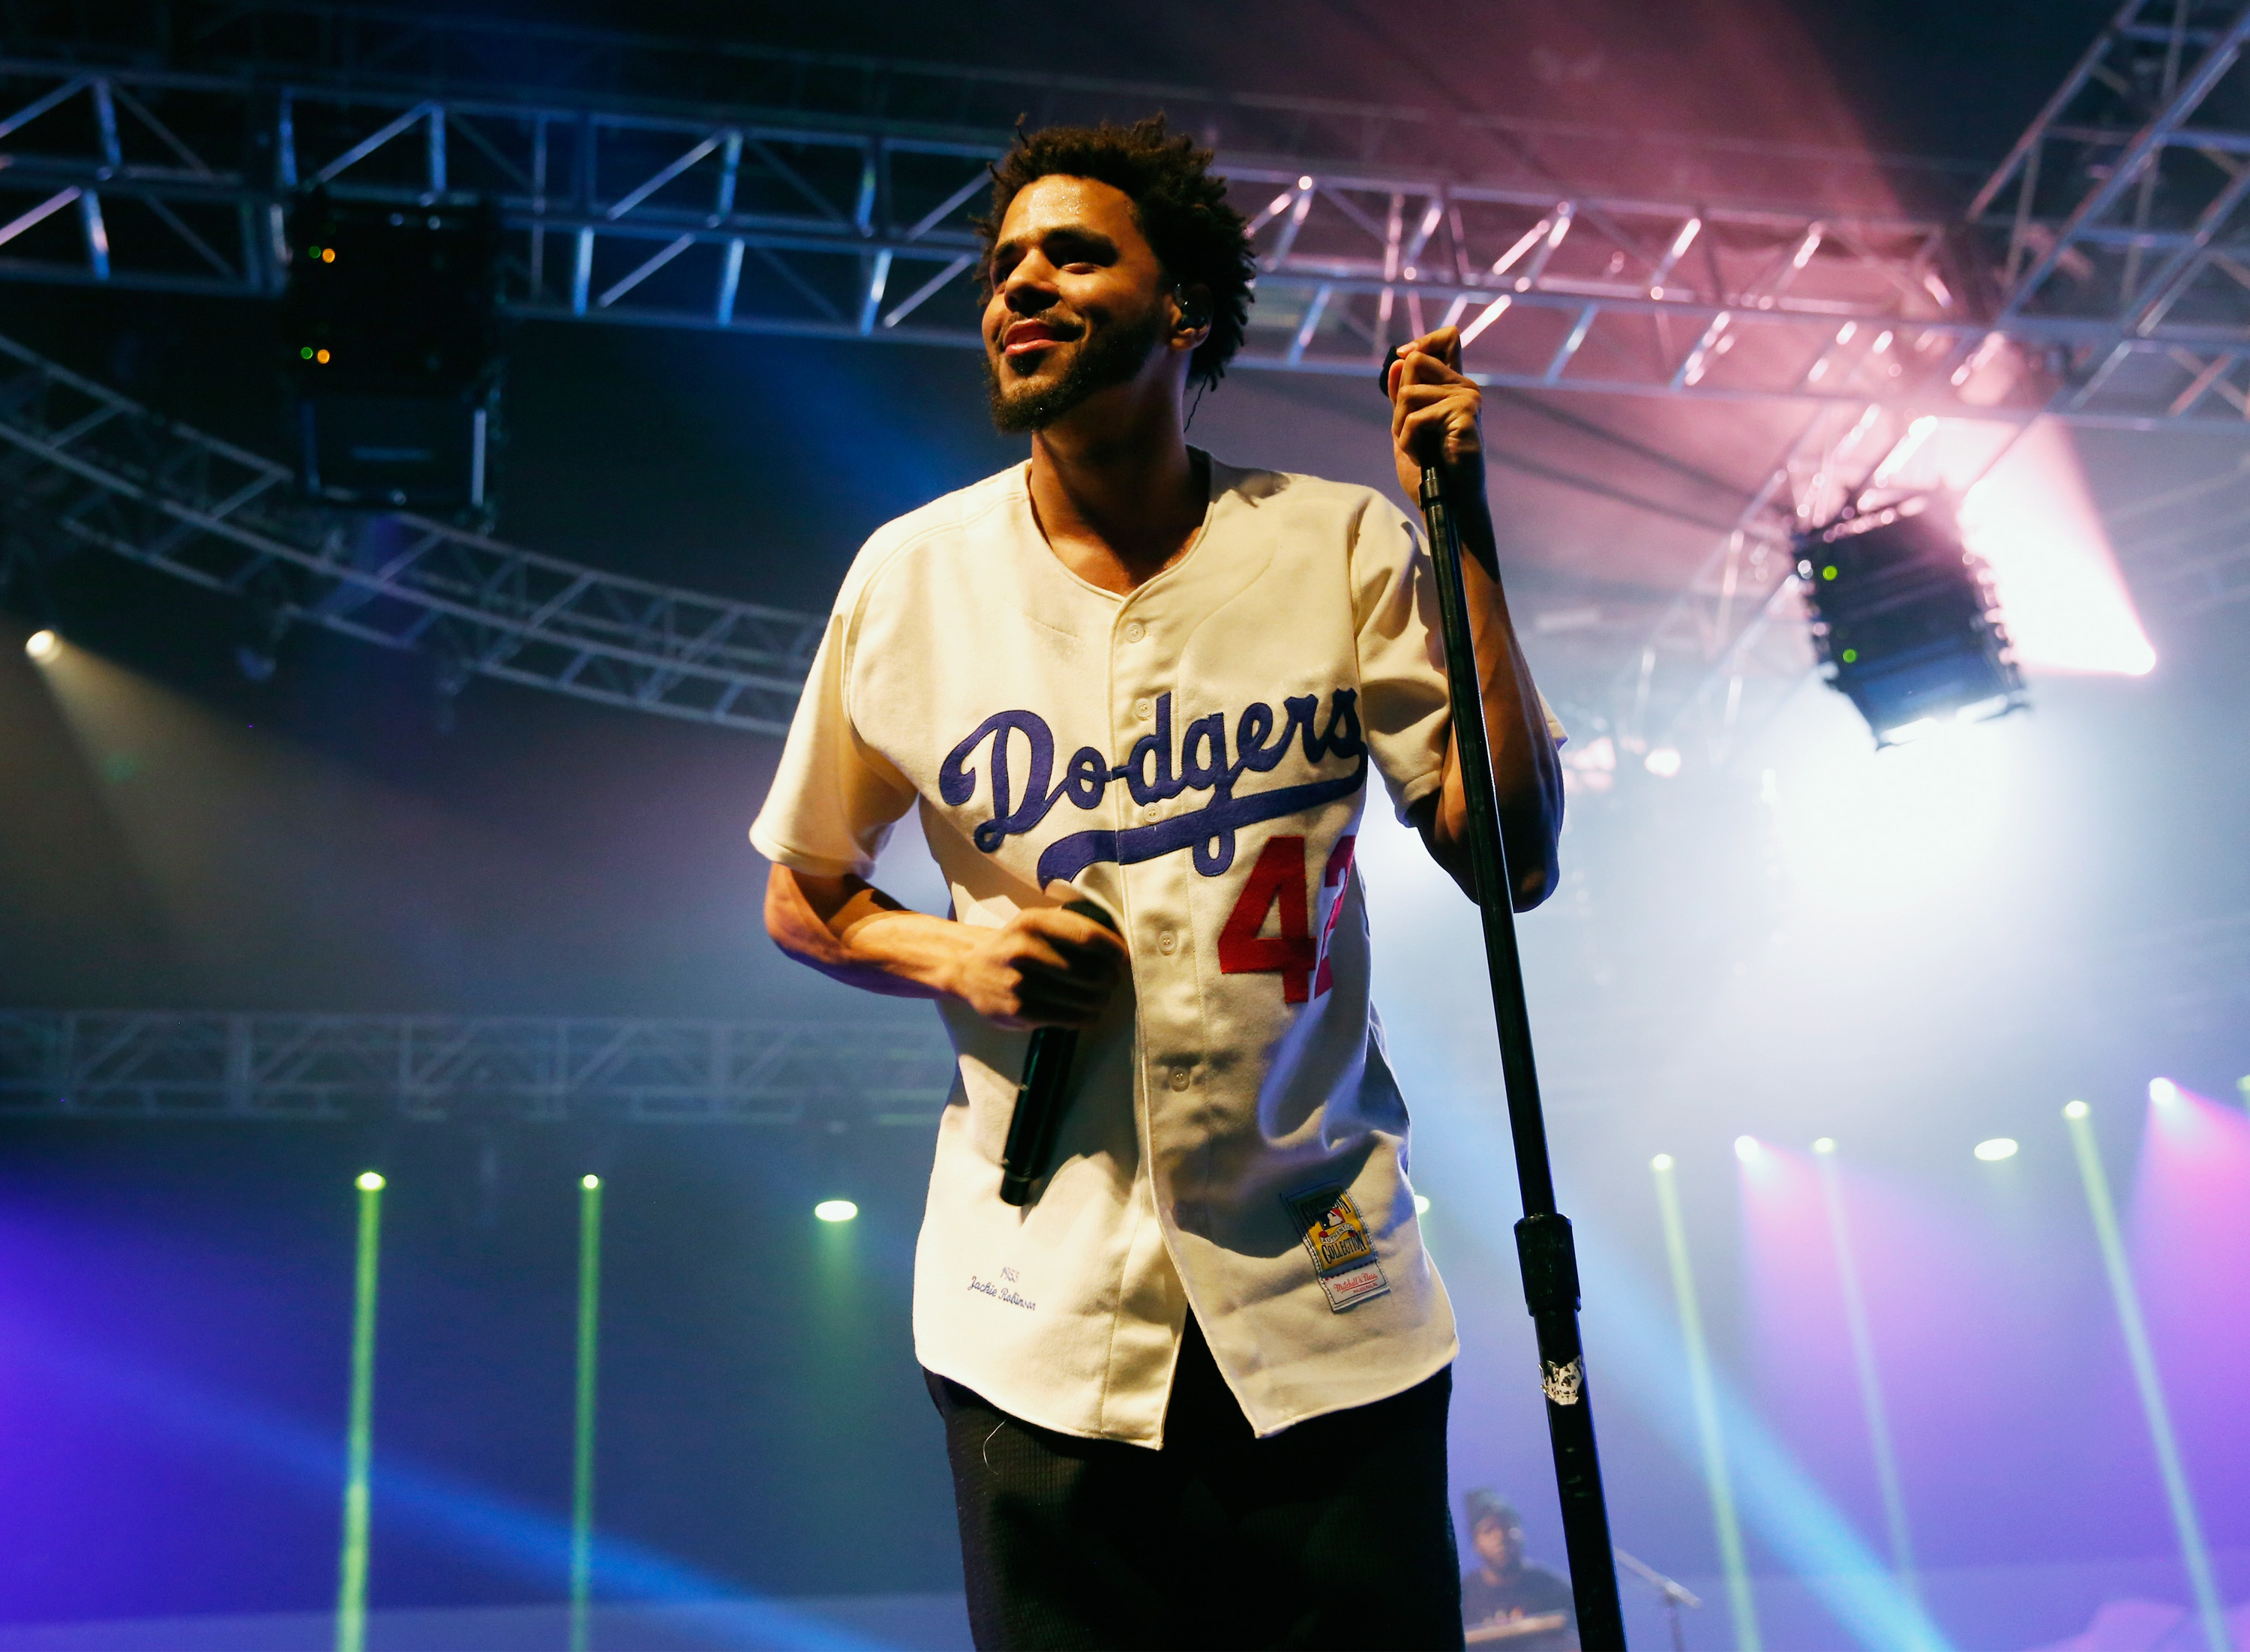 Watch The Trailer For J. Cole's 